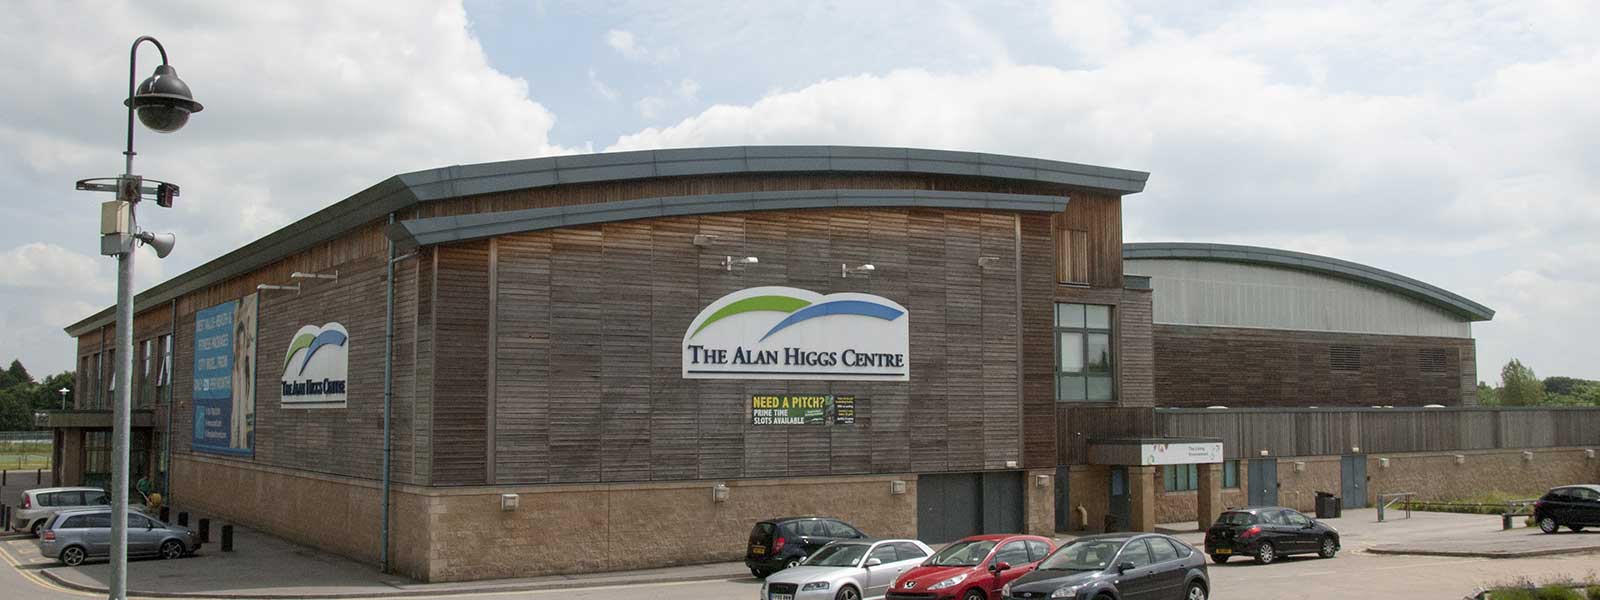 The Alan Higgs Centre - Right side of building